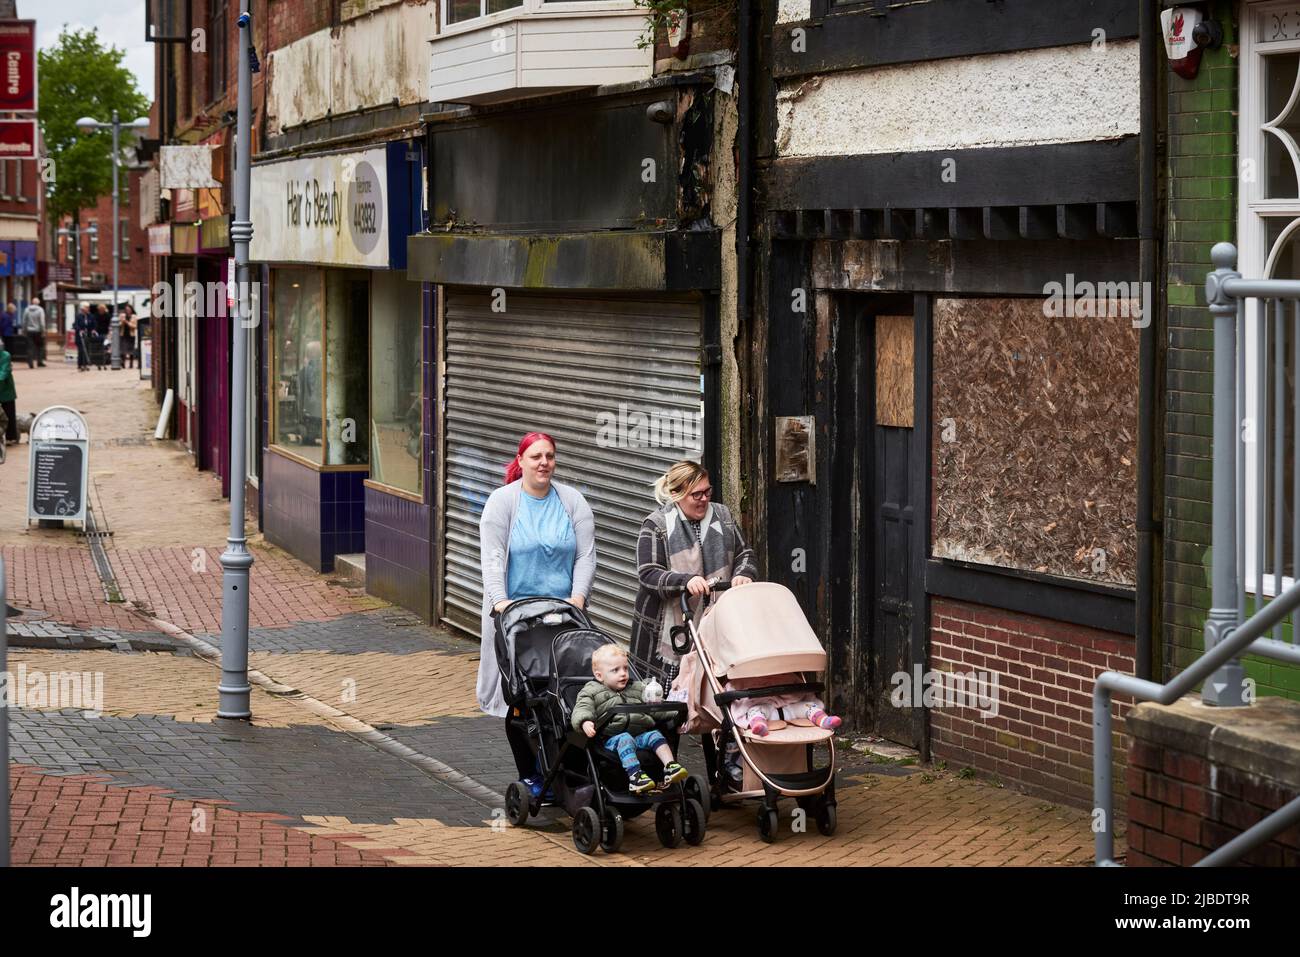 Mums with prams Sutton-in-Ashfield is a market town in Nottinghamshire near  Mansfield closed down shops in the town centre Stock Photo